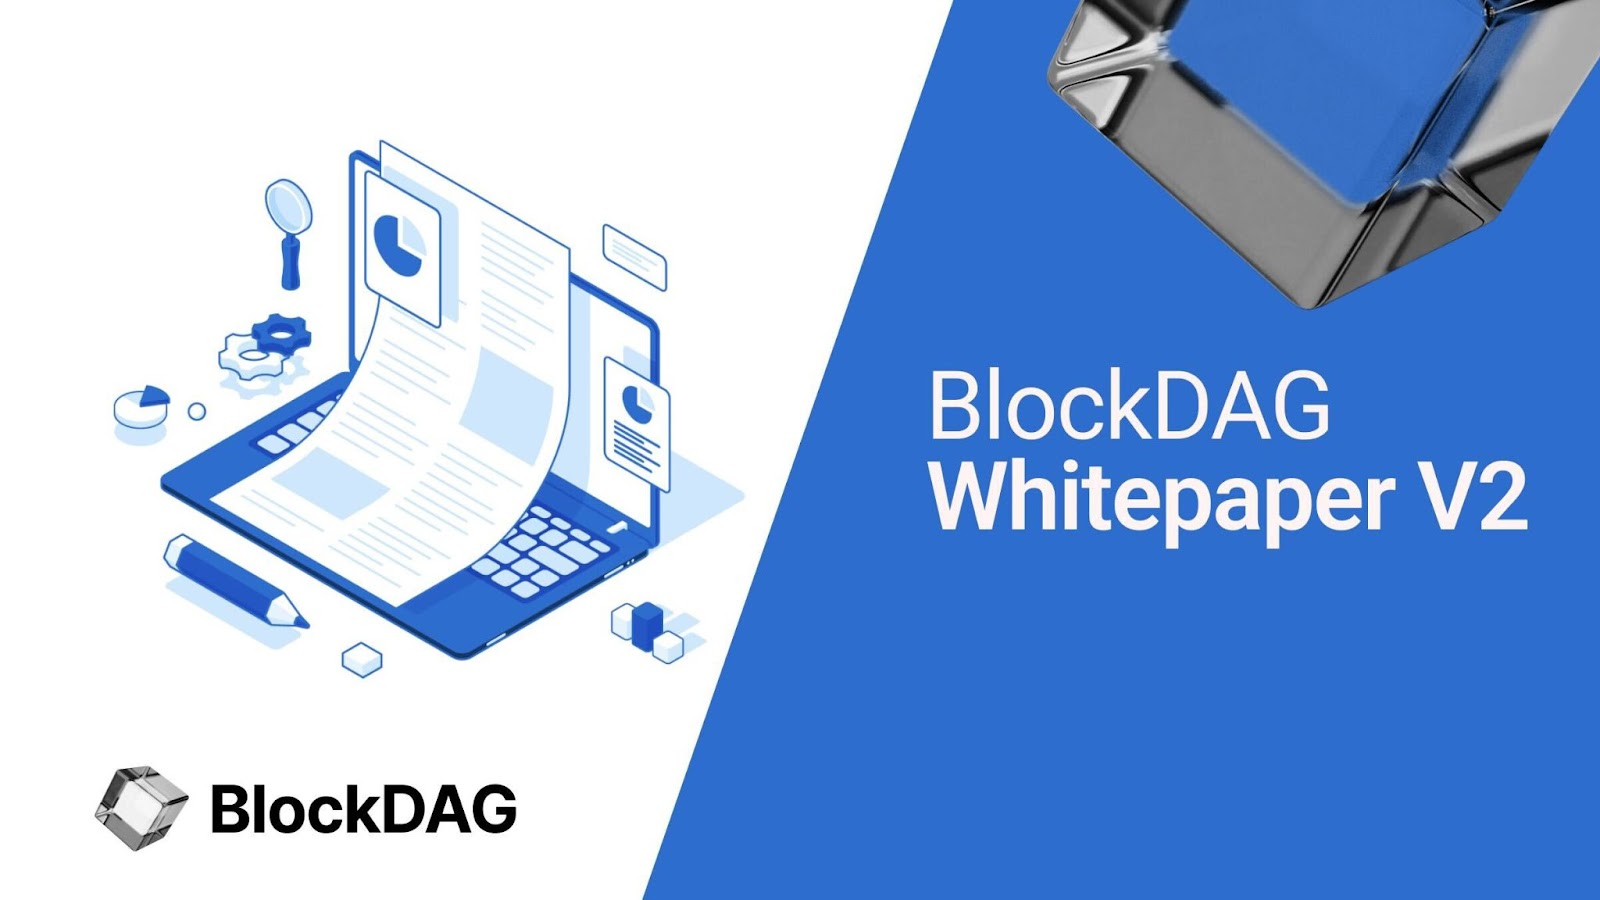 BlockDAG: A New Vision in Crypto Investment